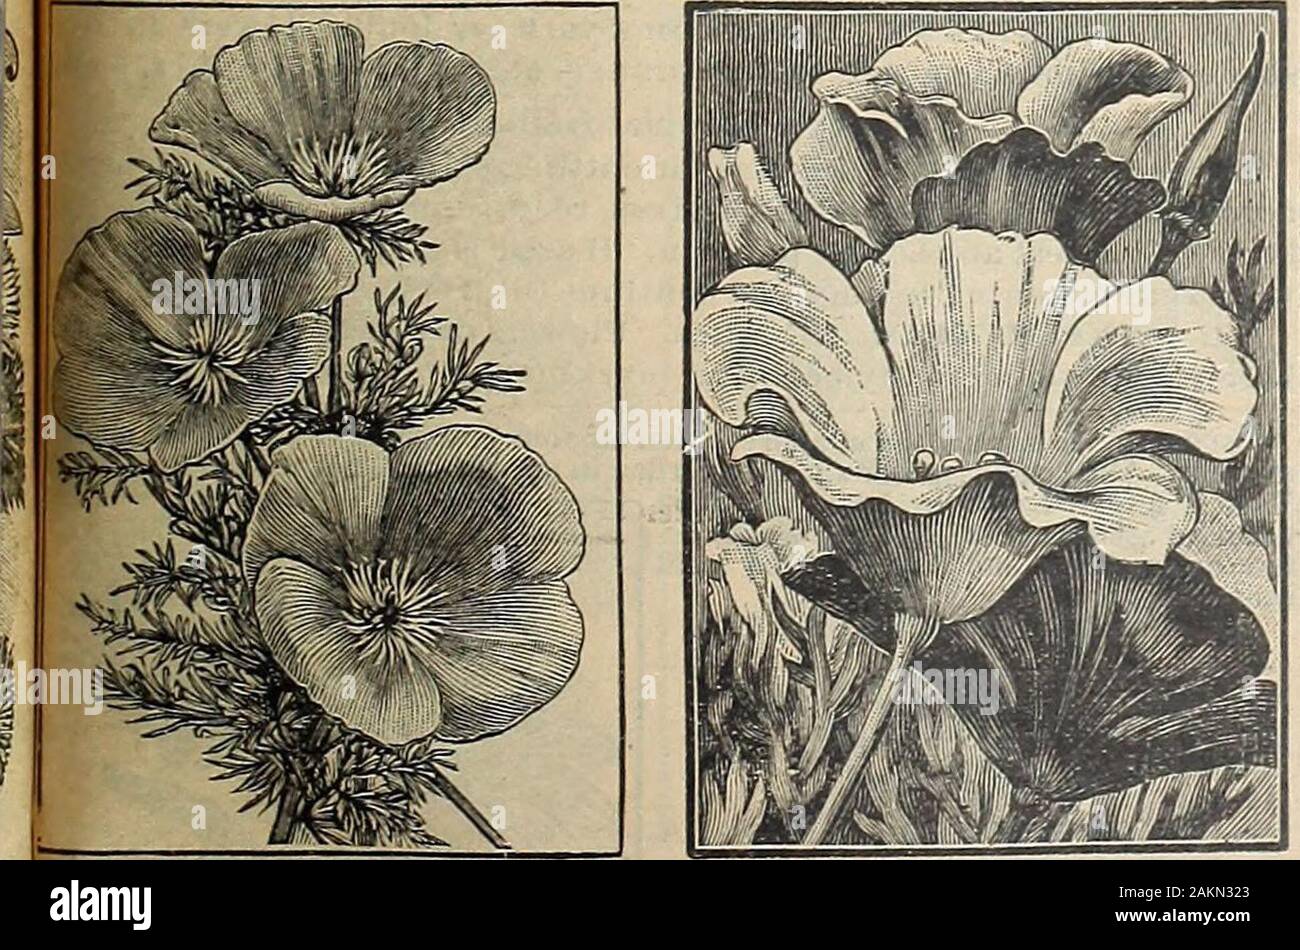 The Maule seed book : 1917 . ree-flowering annual climber bearing clusters ofwhite, scarlet, purple sweet pea shaped blossoms. Grows 10 to 15 feetMgh, making it an excellent one for trellises, fences, or where a climb-ing vine could be used. Highly satisfactory In almost any situation. 1316 SOUDAN PURPLE. The twining stems are of an intense pur-ple; the long spikes of flowers are a brilliant purple violet. Pkt., 5 cts. I3J7 DAYLiIGHT. Bold spikes of pure white flowers, appearingtorn base to summit. Packet, 5 cents; ounce, 25 cents. J3I8 AIjL sorts MIXED. This mixture includes the above andmany Stock Photo